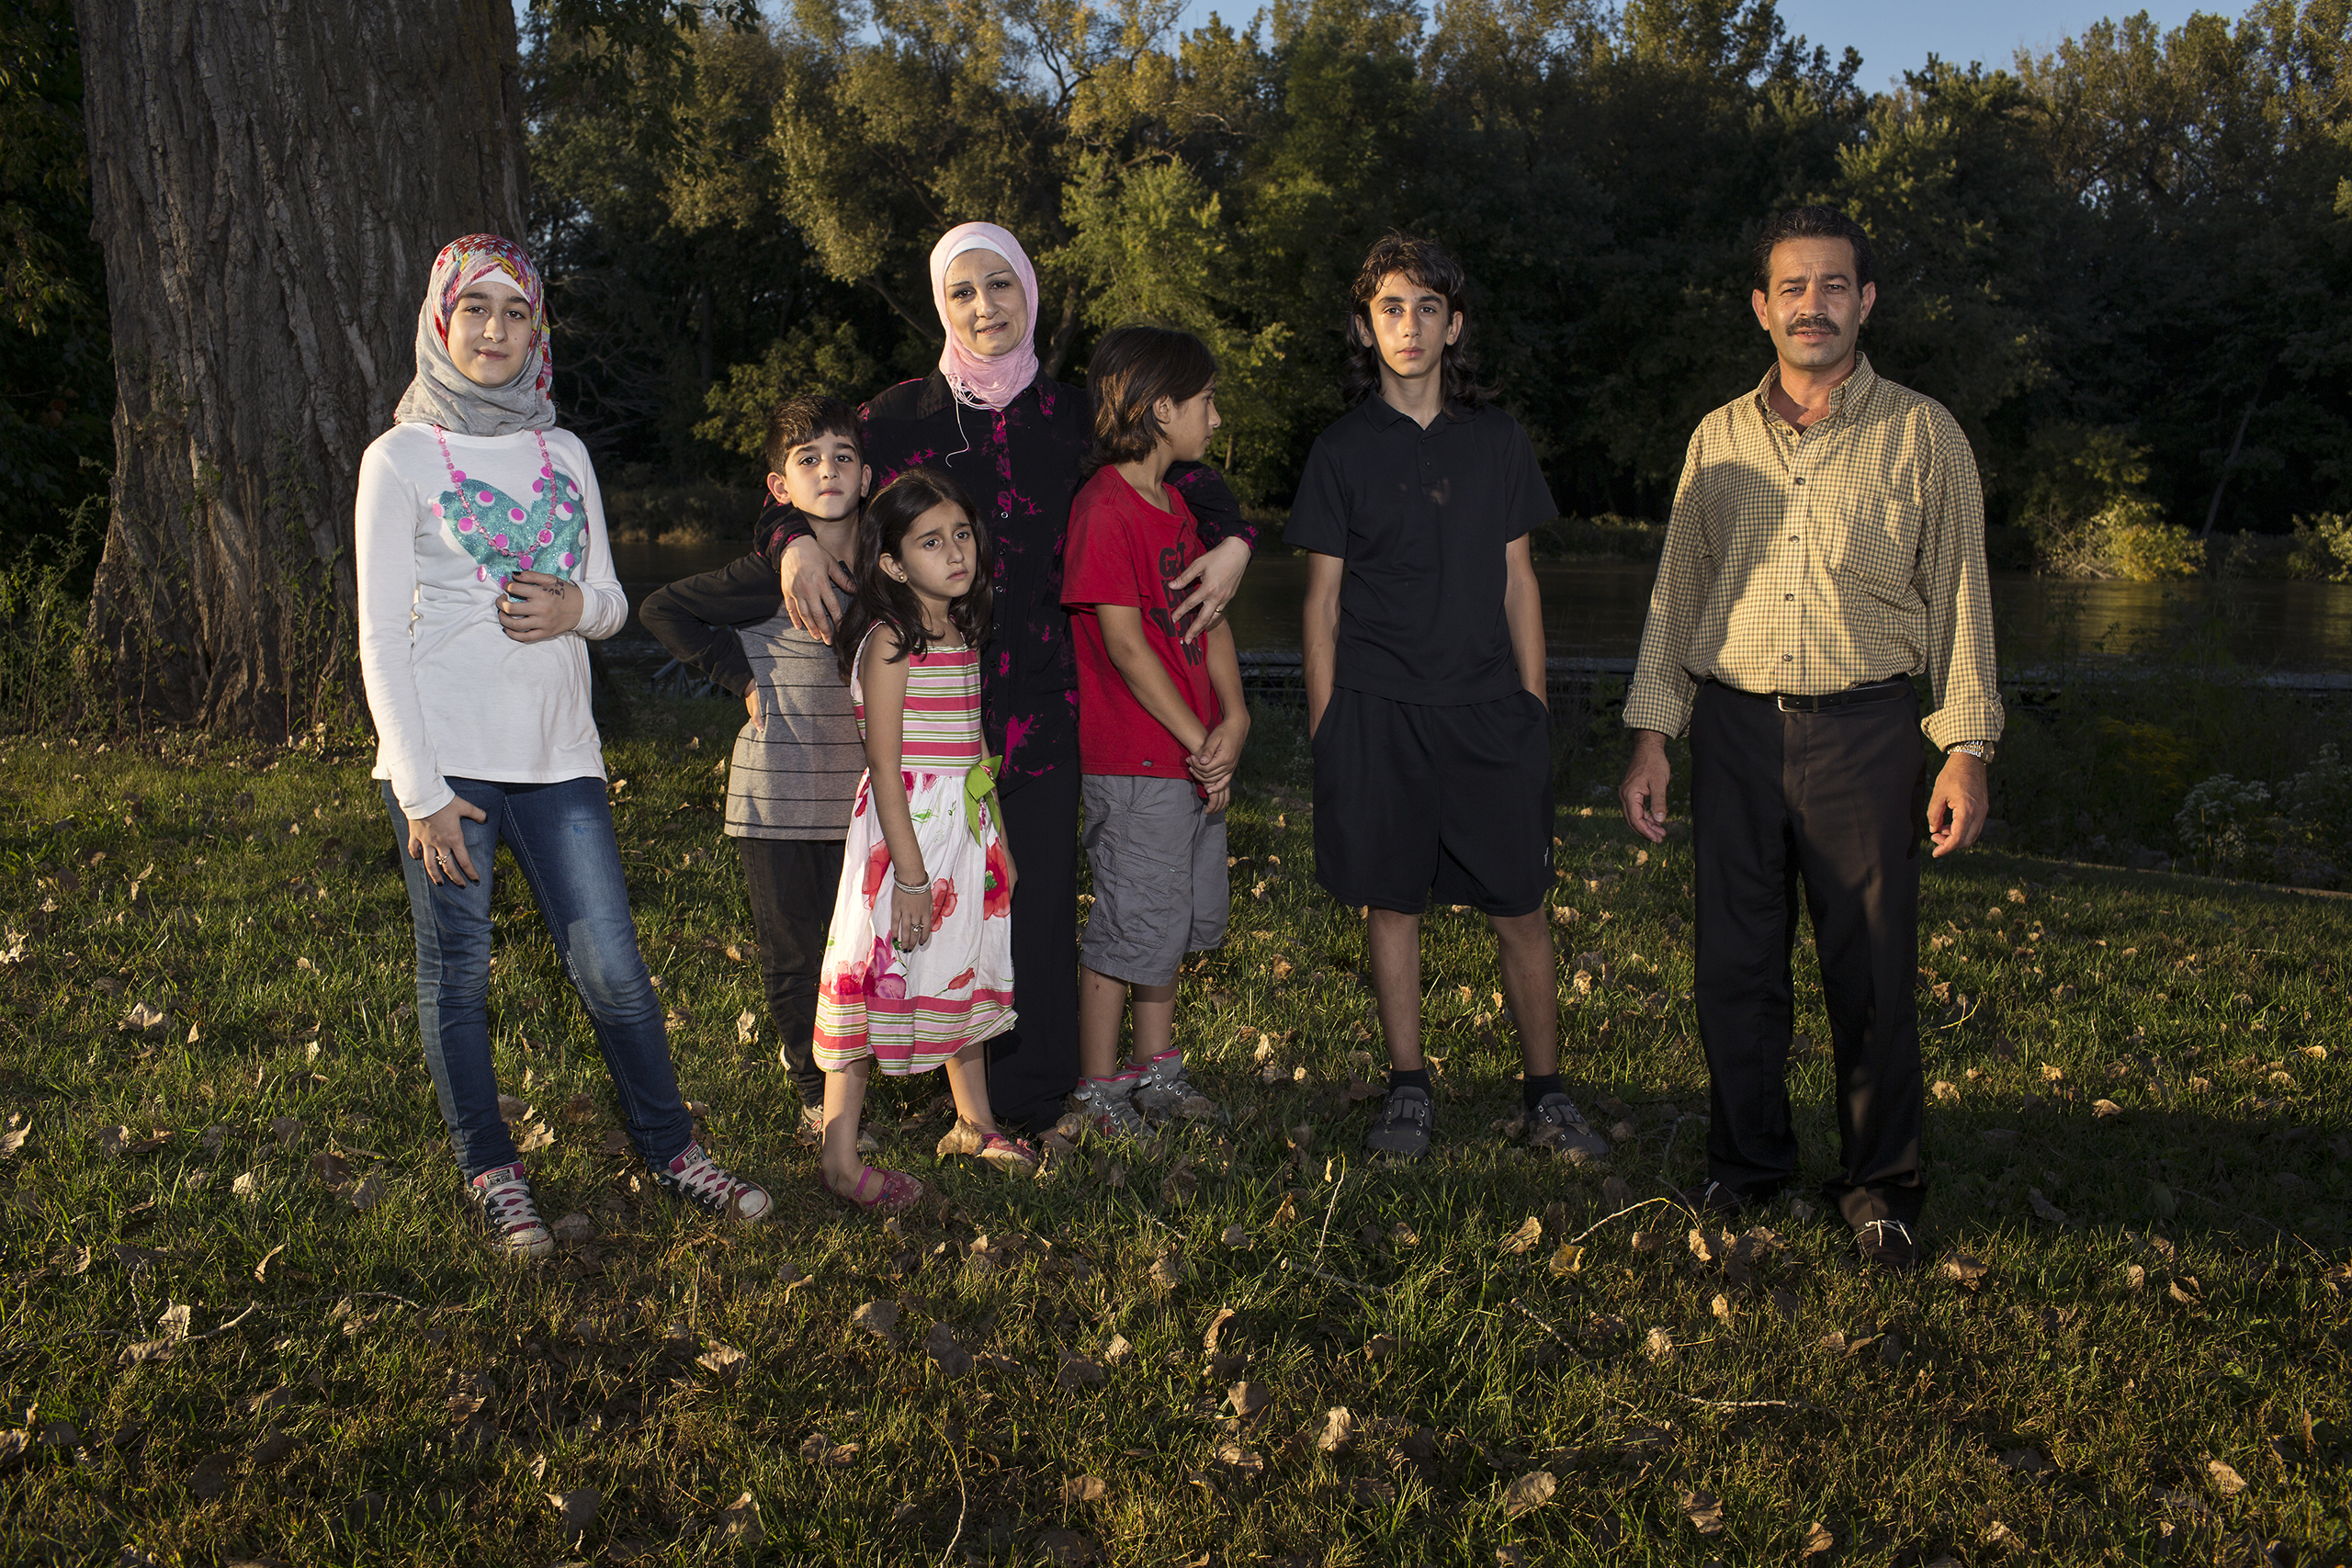 Ghazweh and Abdul Fattah at a park in Des Moines with their children, from left to right: Sedra, Mutaz, Hala, Haidar and Nazeer. (Danny Wilcox Frazier—VII for TIME)